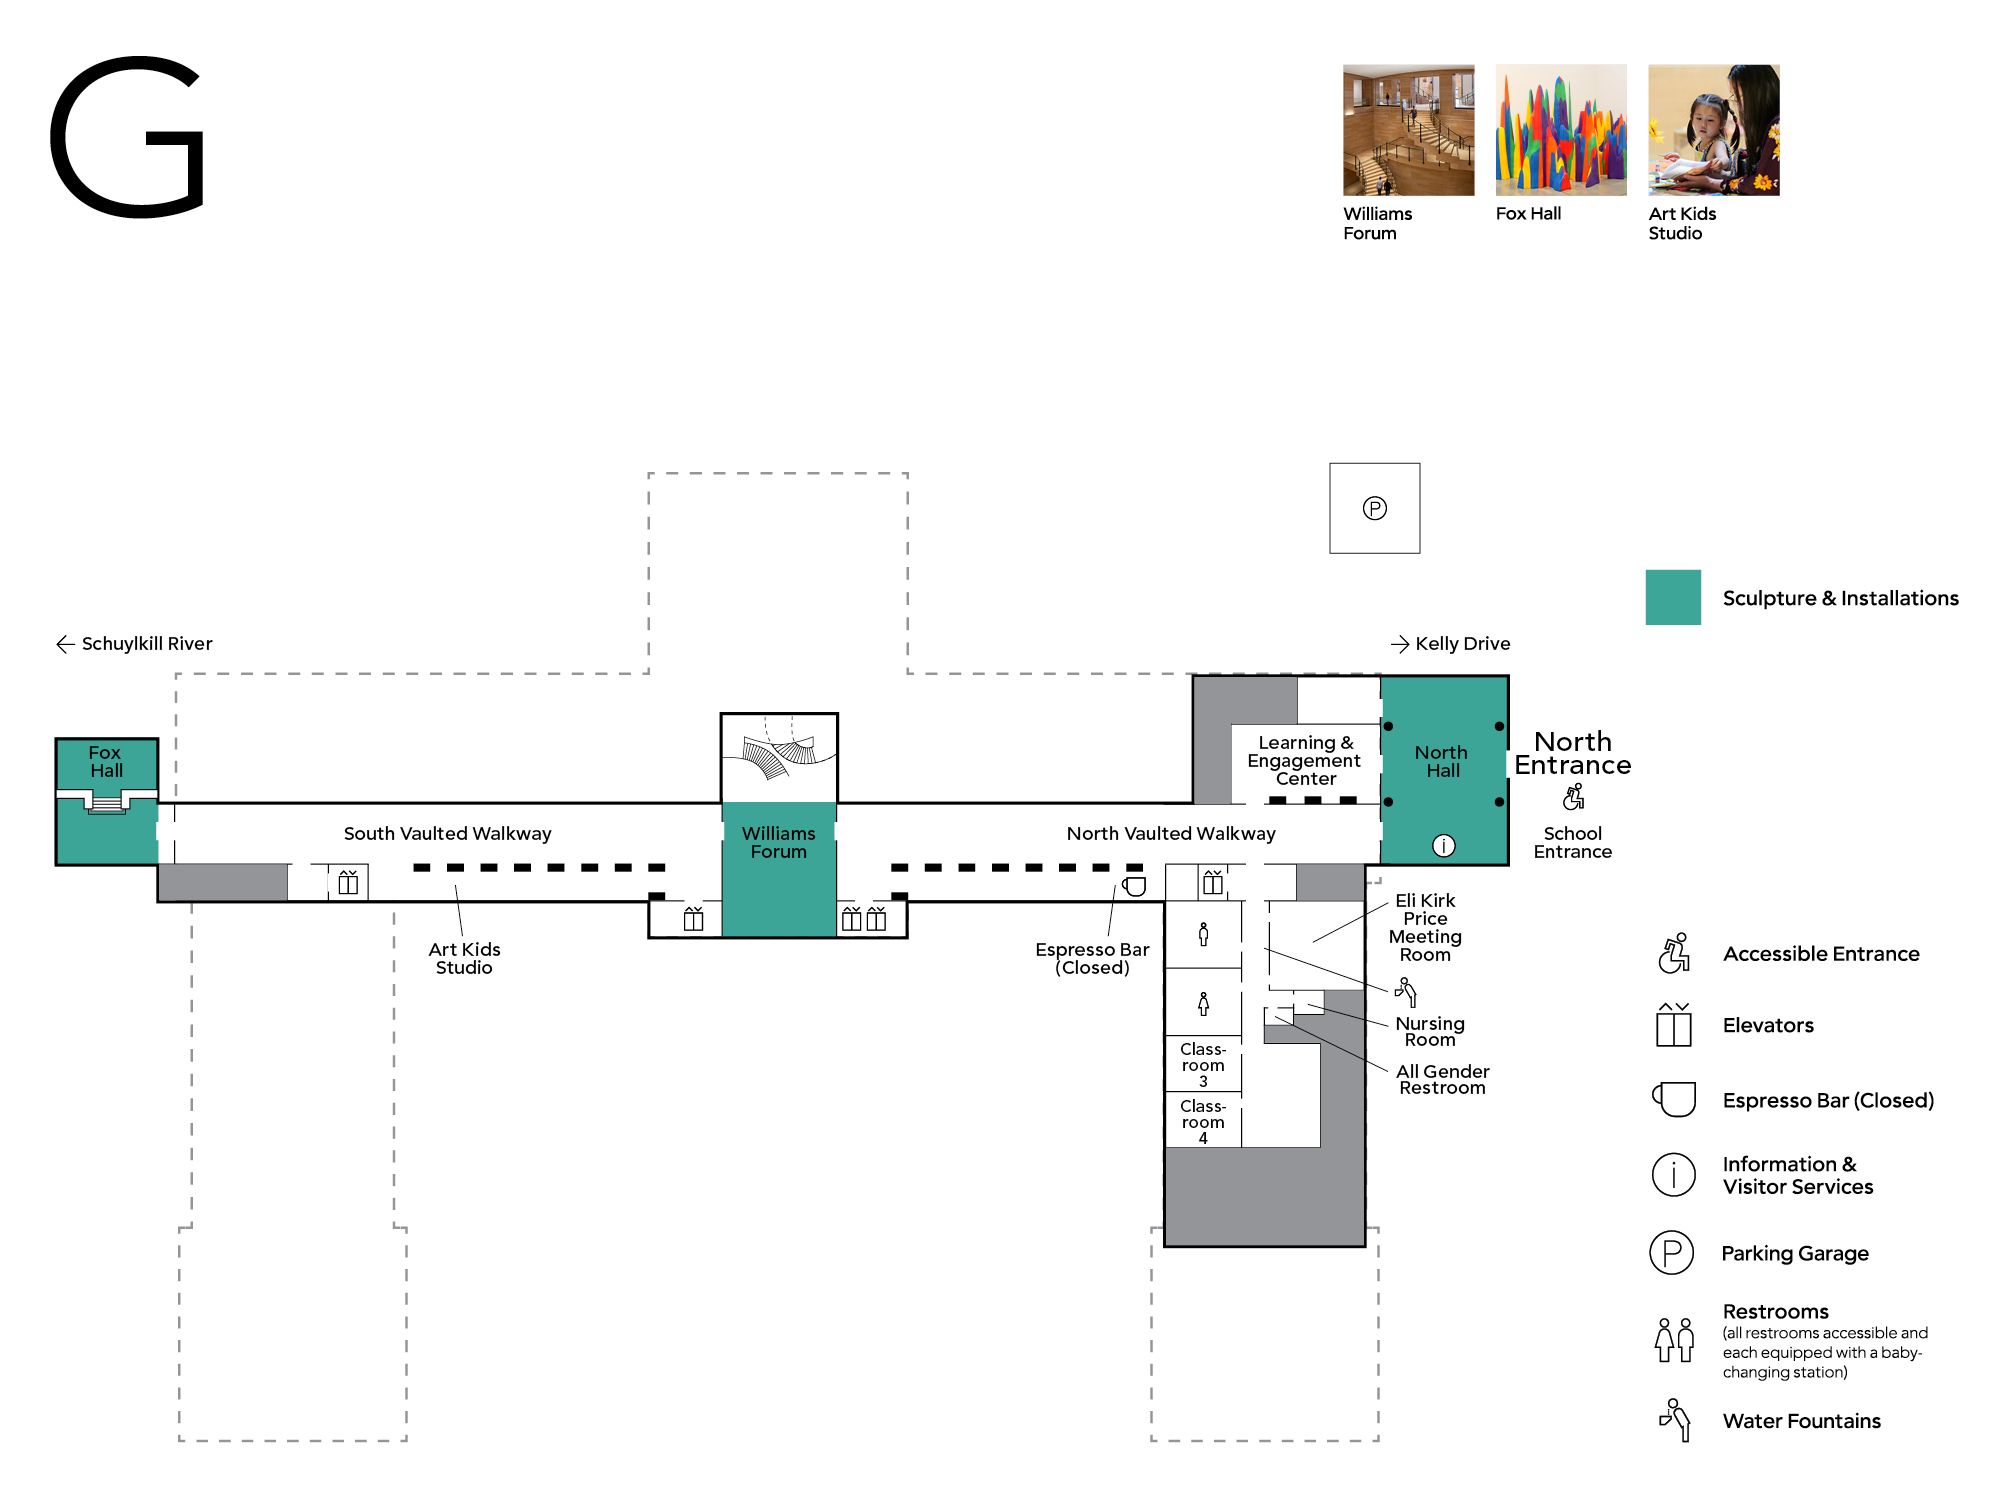 A map showing the ground floor layout of the Philadelphia Museum of Art.